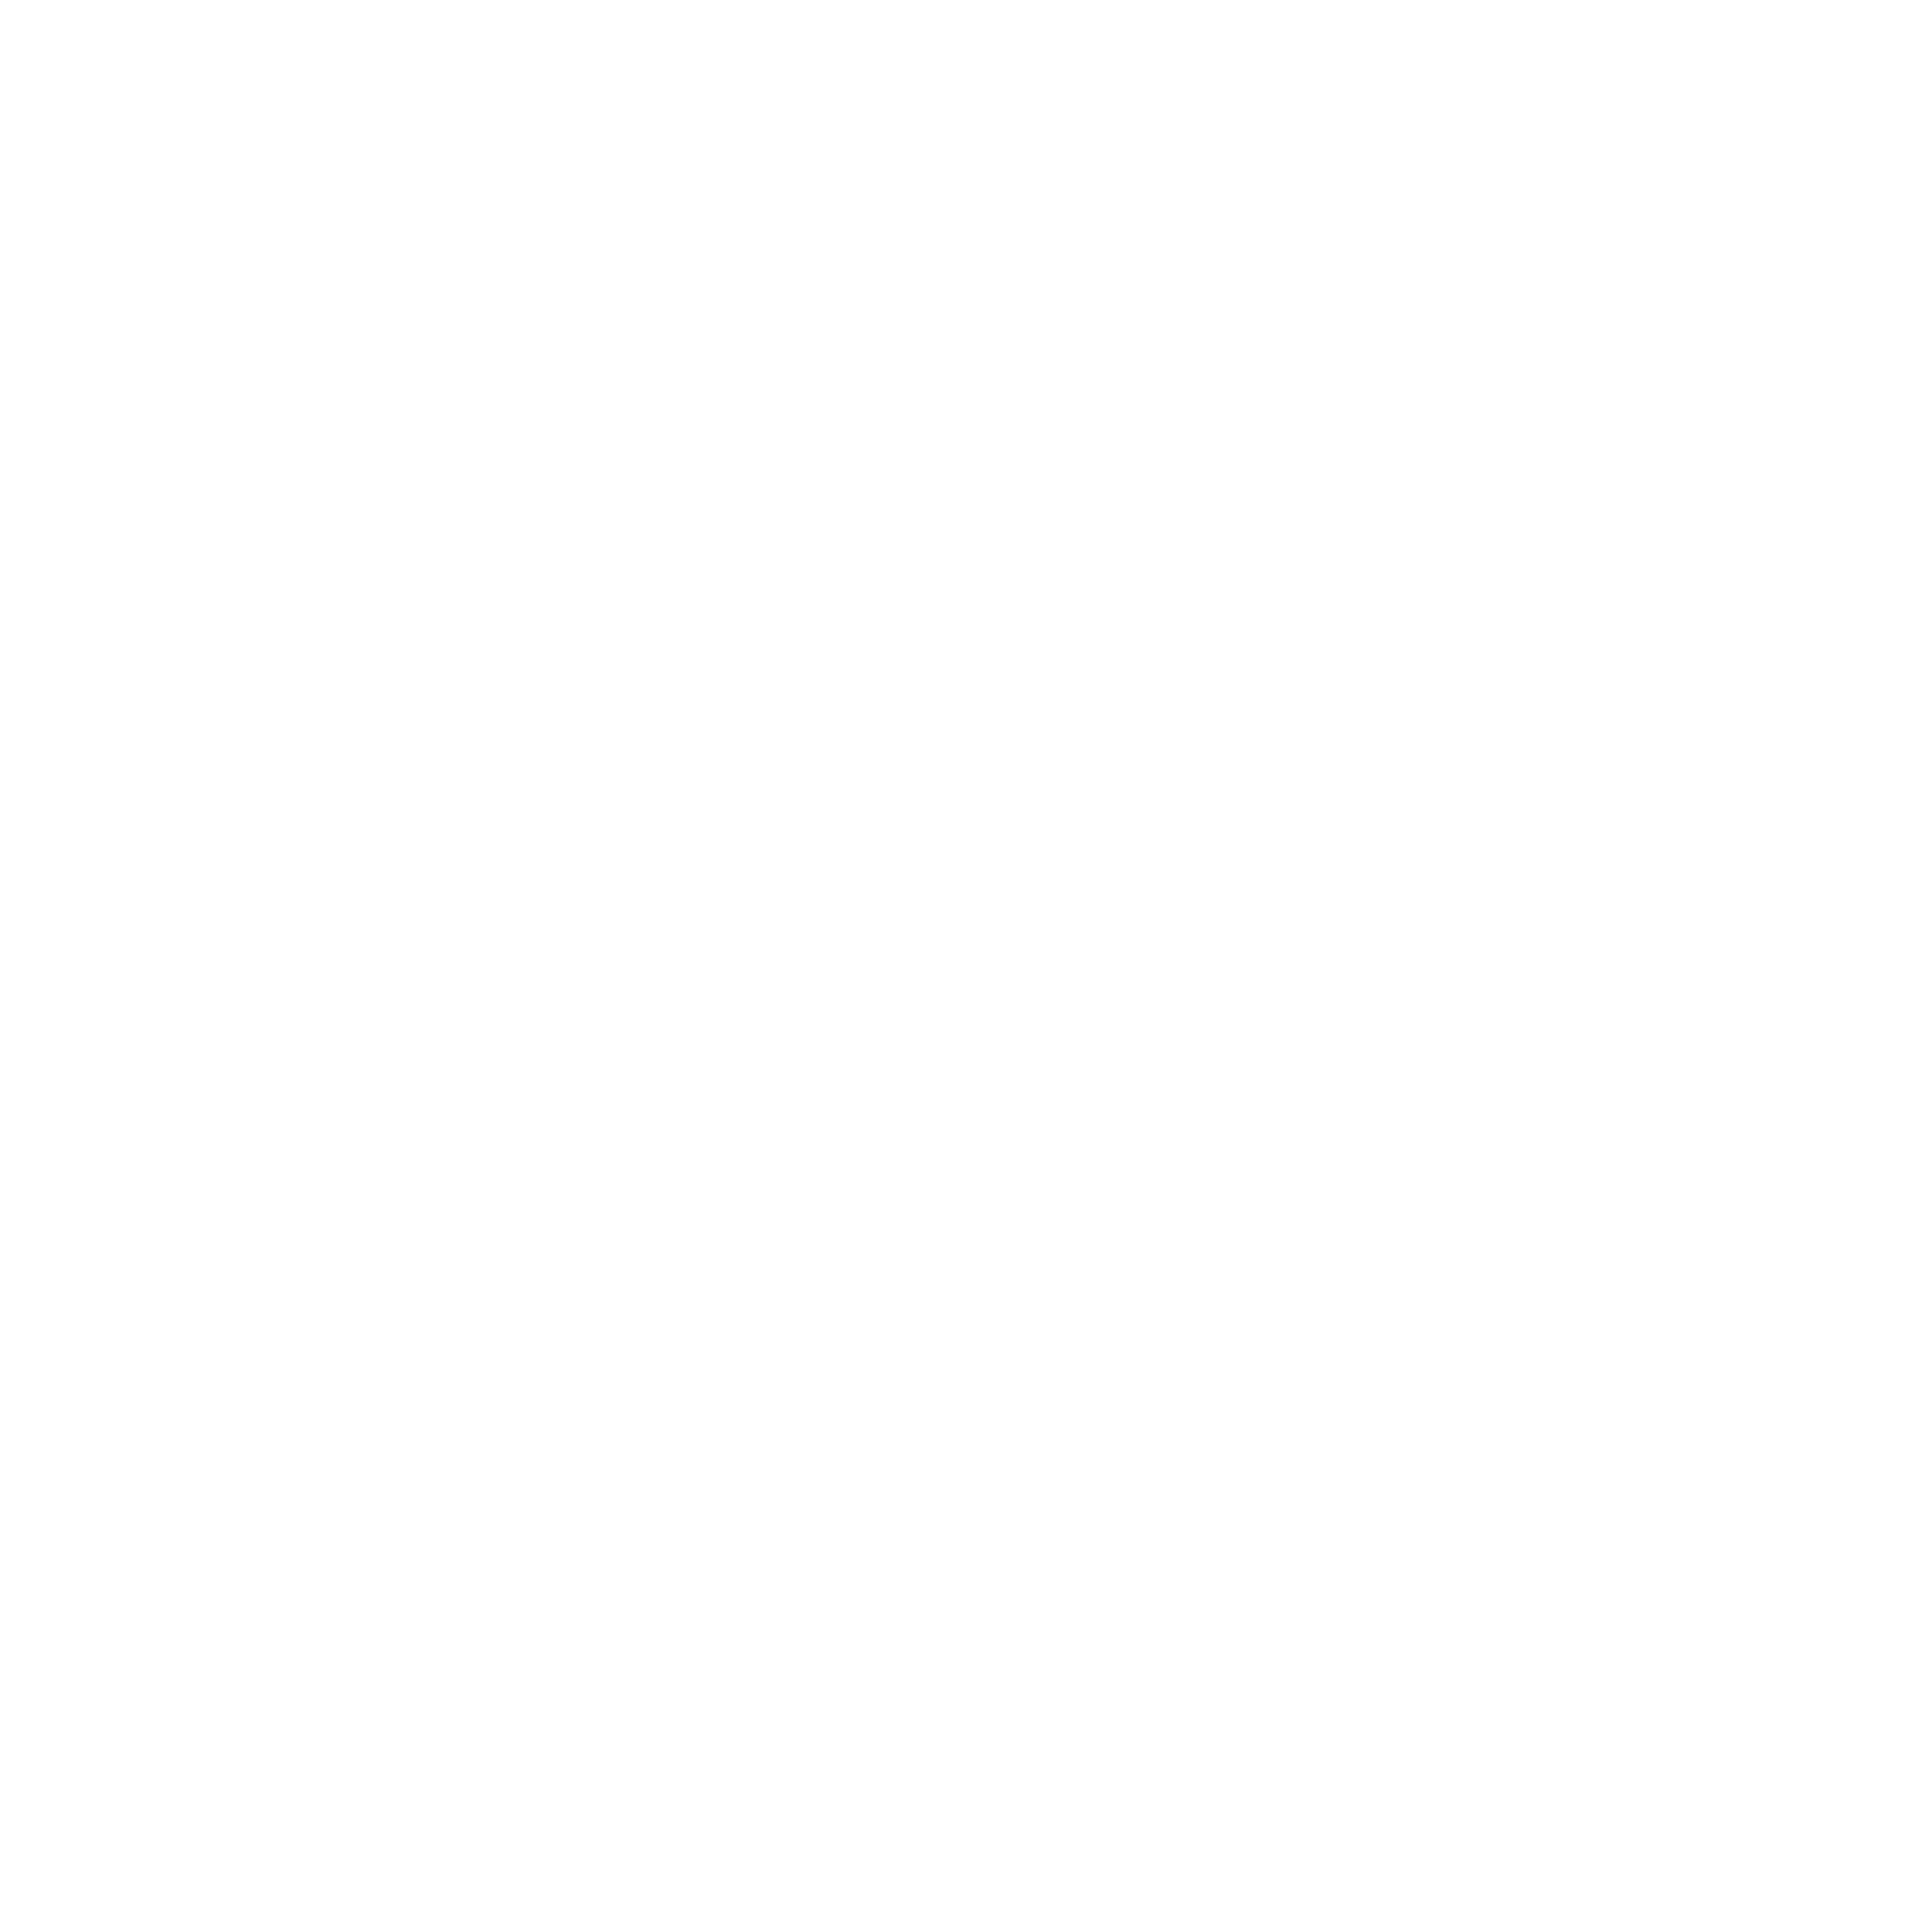 Learn How to Stand Out From the Crowd with a Strong Digital Presence   Many manufacturers still rely on old-school methods to promote their brands. Trade shows and word-of-mouth referrals work, but they aren't enough for today's industrial buyers.   Download the Ultimate Guide to Digital Marketing for Manufacturers and learn how you can stand out from the crowd and attract your ideal customers. 